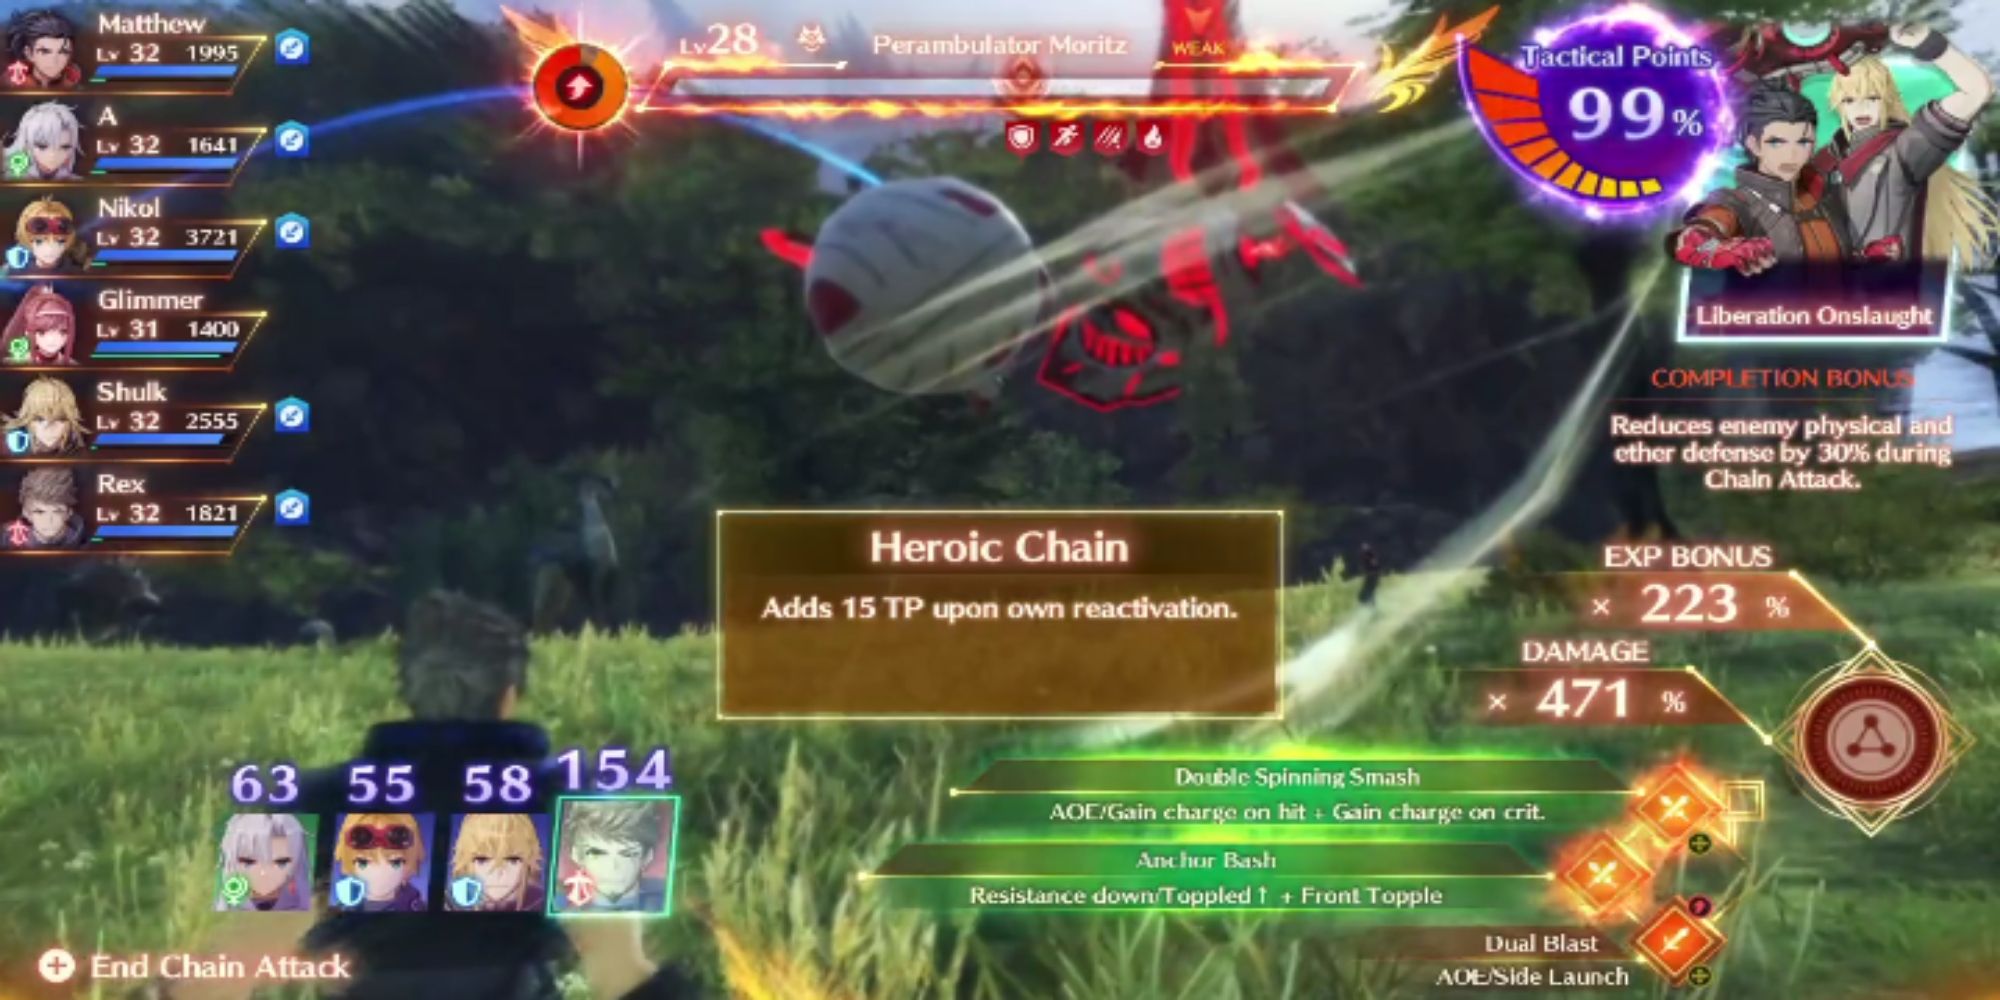 XENOBLADE CHRONICLES 3 FUTURE REDEEMED Gameplay Walkthrough Part 1 (DLC) No  Commentary 